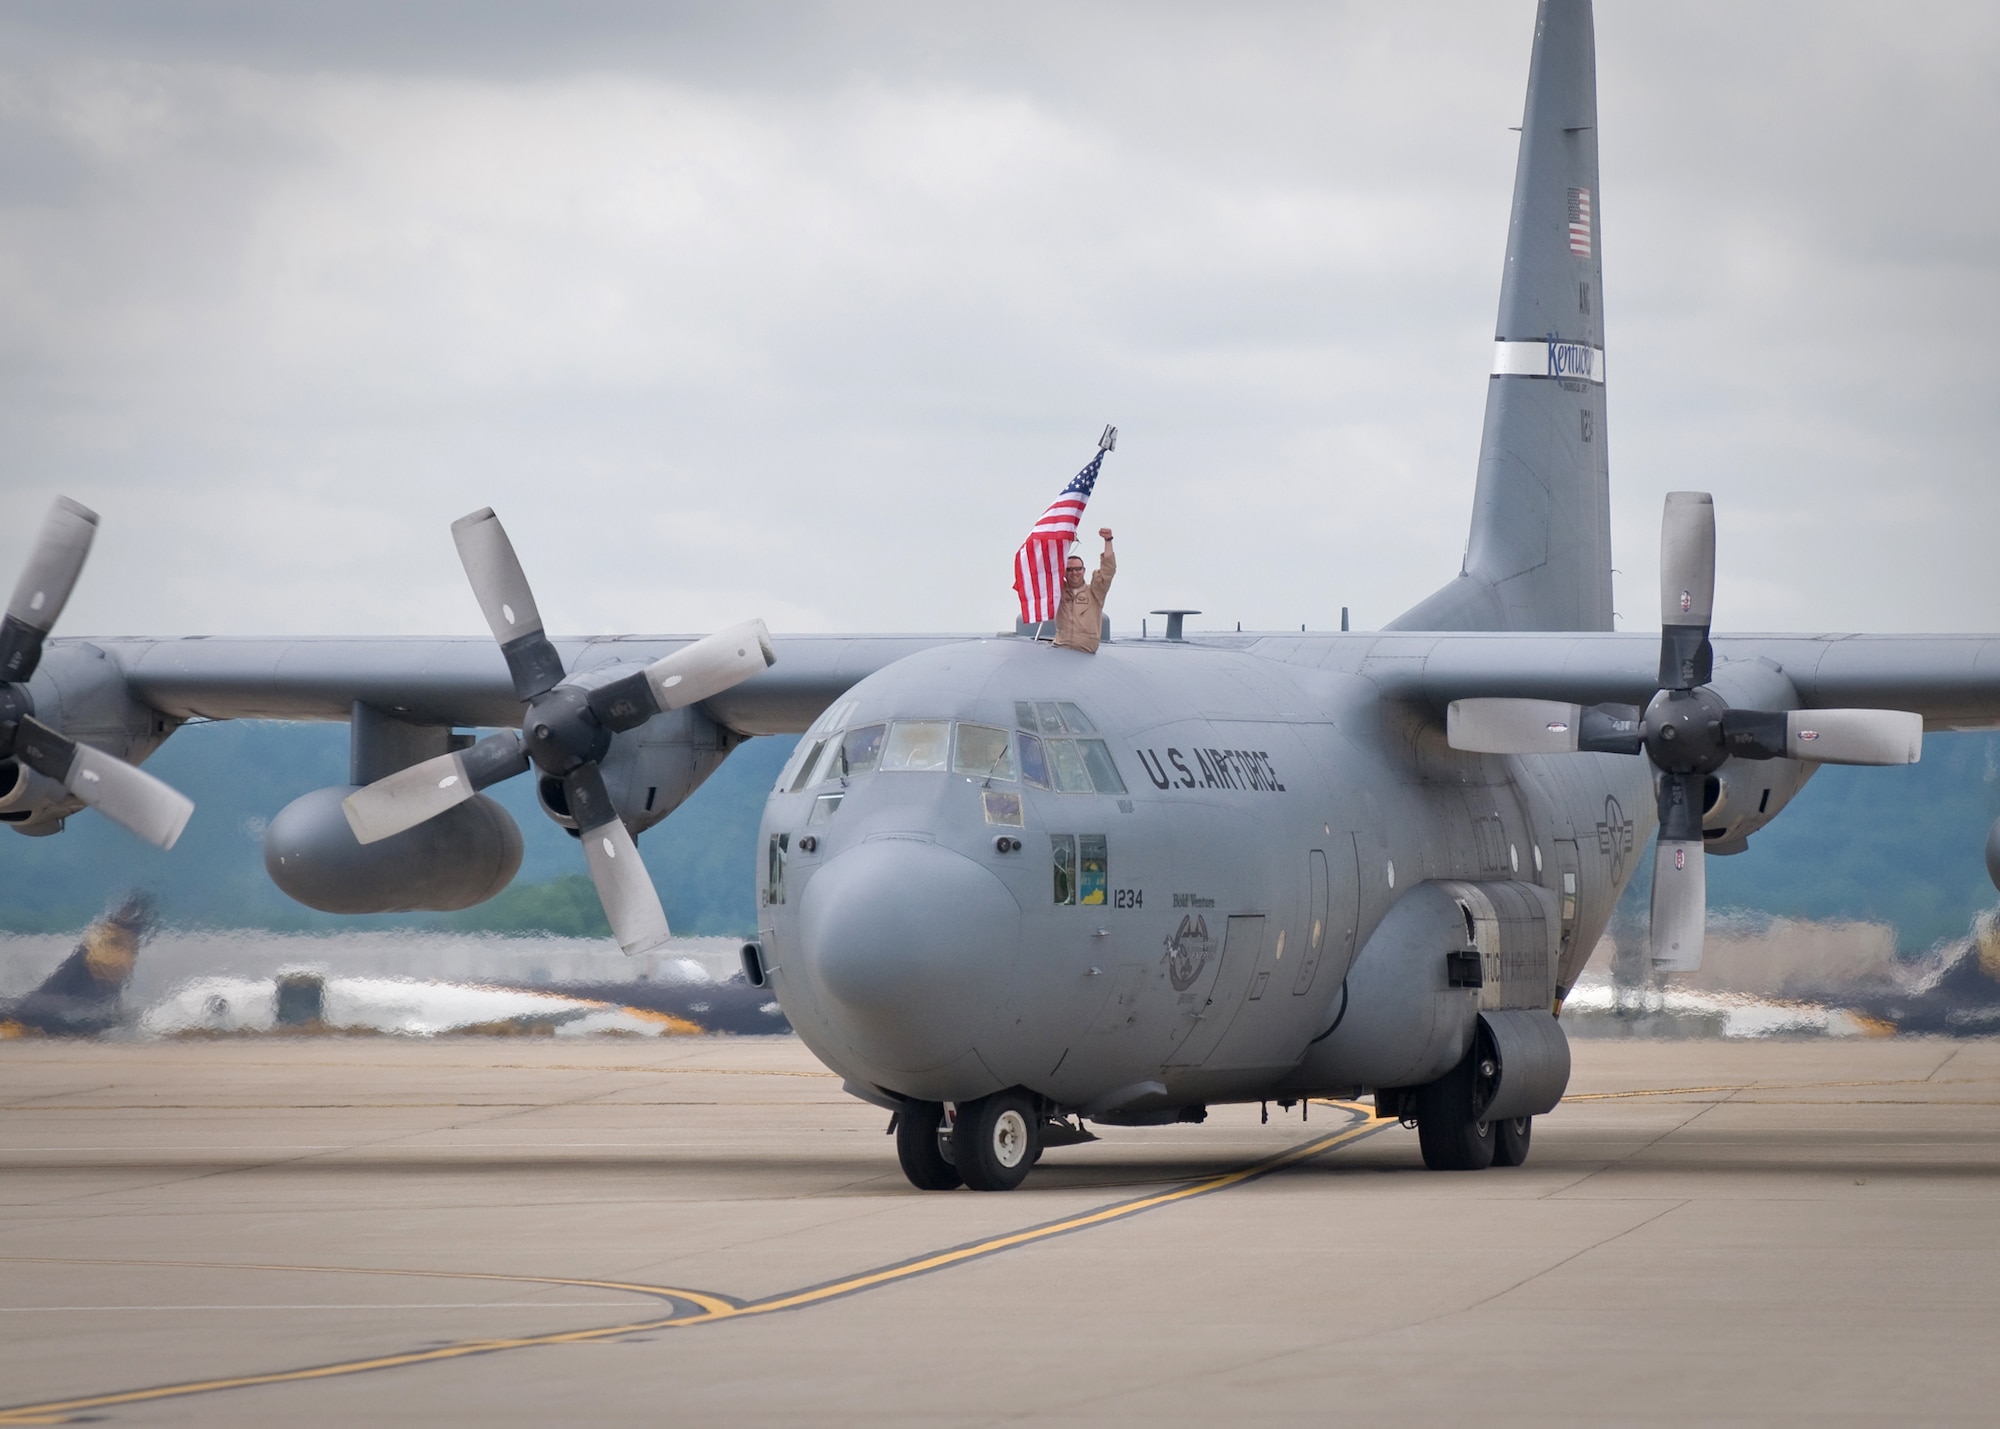 A Kentucky Air Guardsman displays the colors as a C-130 from the 123rd Airlift Wing taxis to a stop on the flightline of the Kentucky Air National Guard Base in Louisville, Ky., on May 16, 2009. The aircraft and its passengers were returning from a two-month deployment to Afghanistan for Operation Enduring Freedom. (USAF photo by Capt. Dale Greer.)